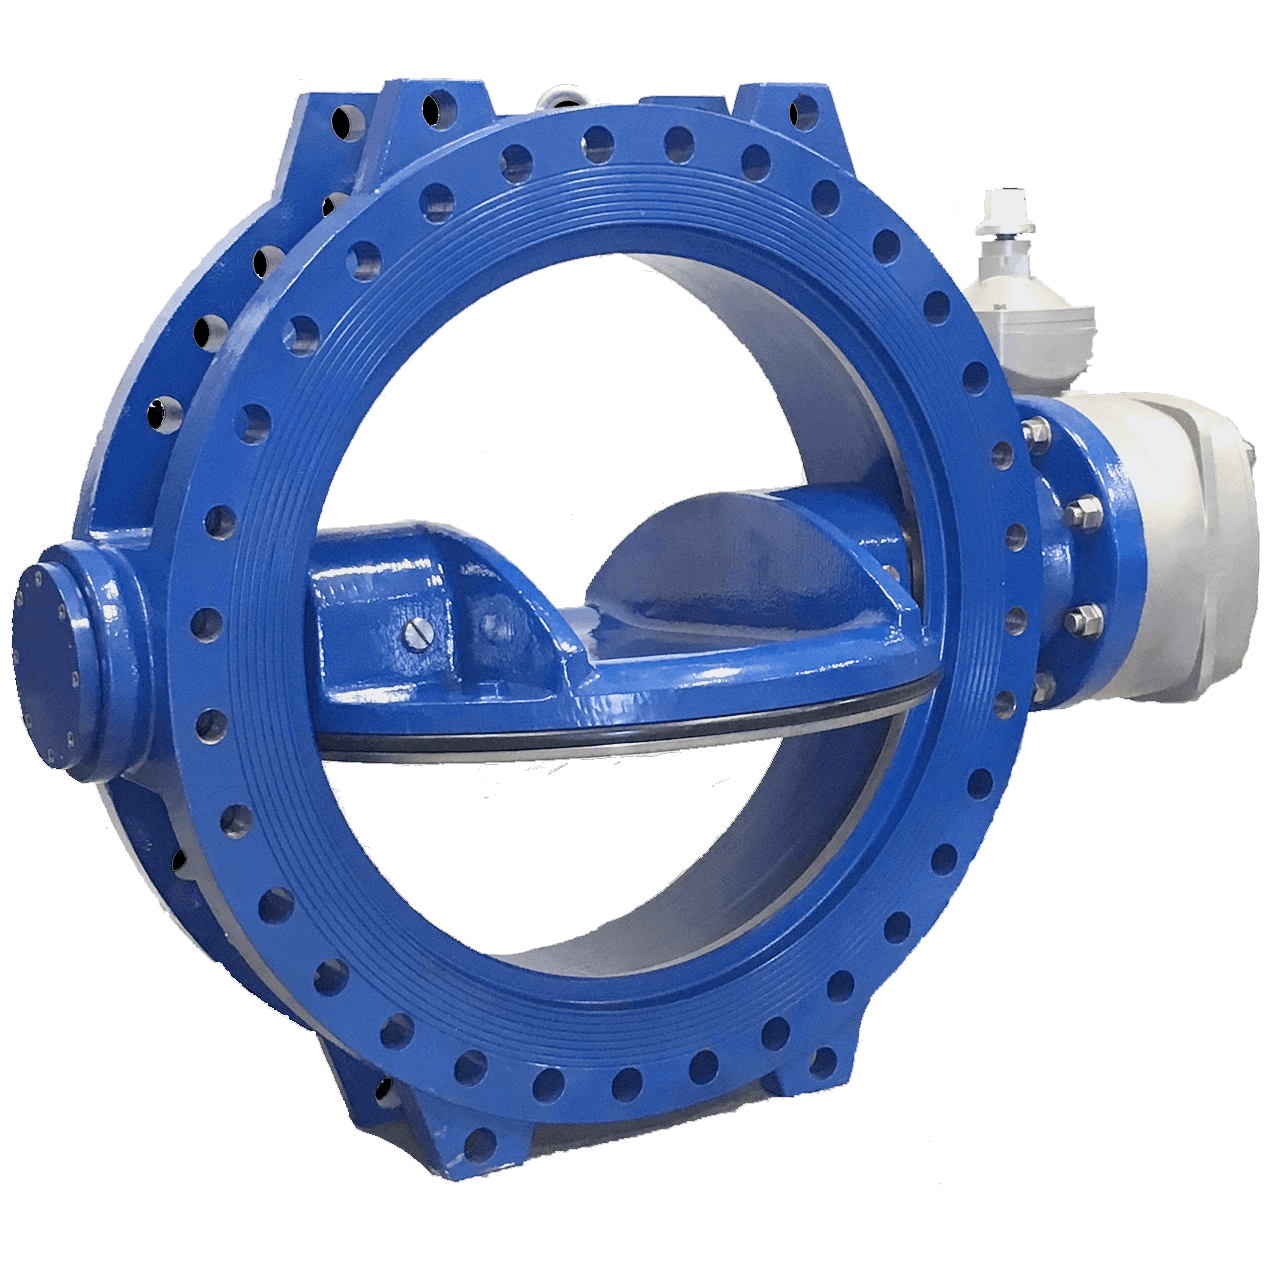 AWWA C504 Double Eccentric Butterfly Valve Featured Image